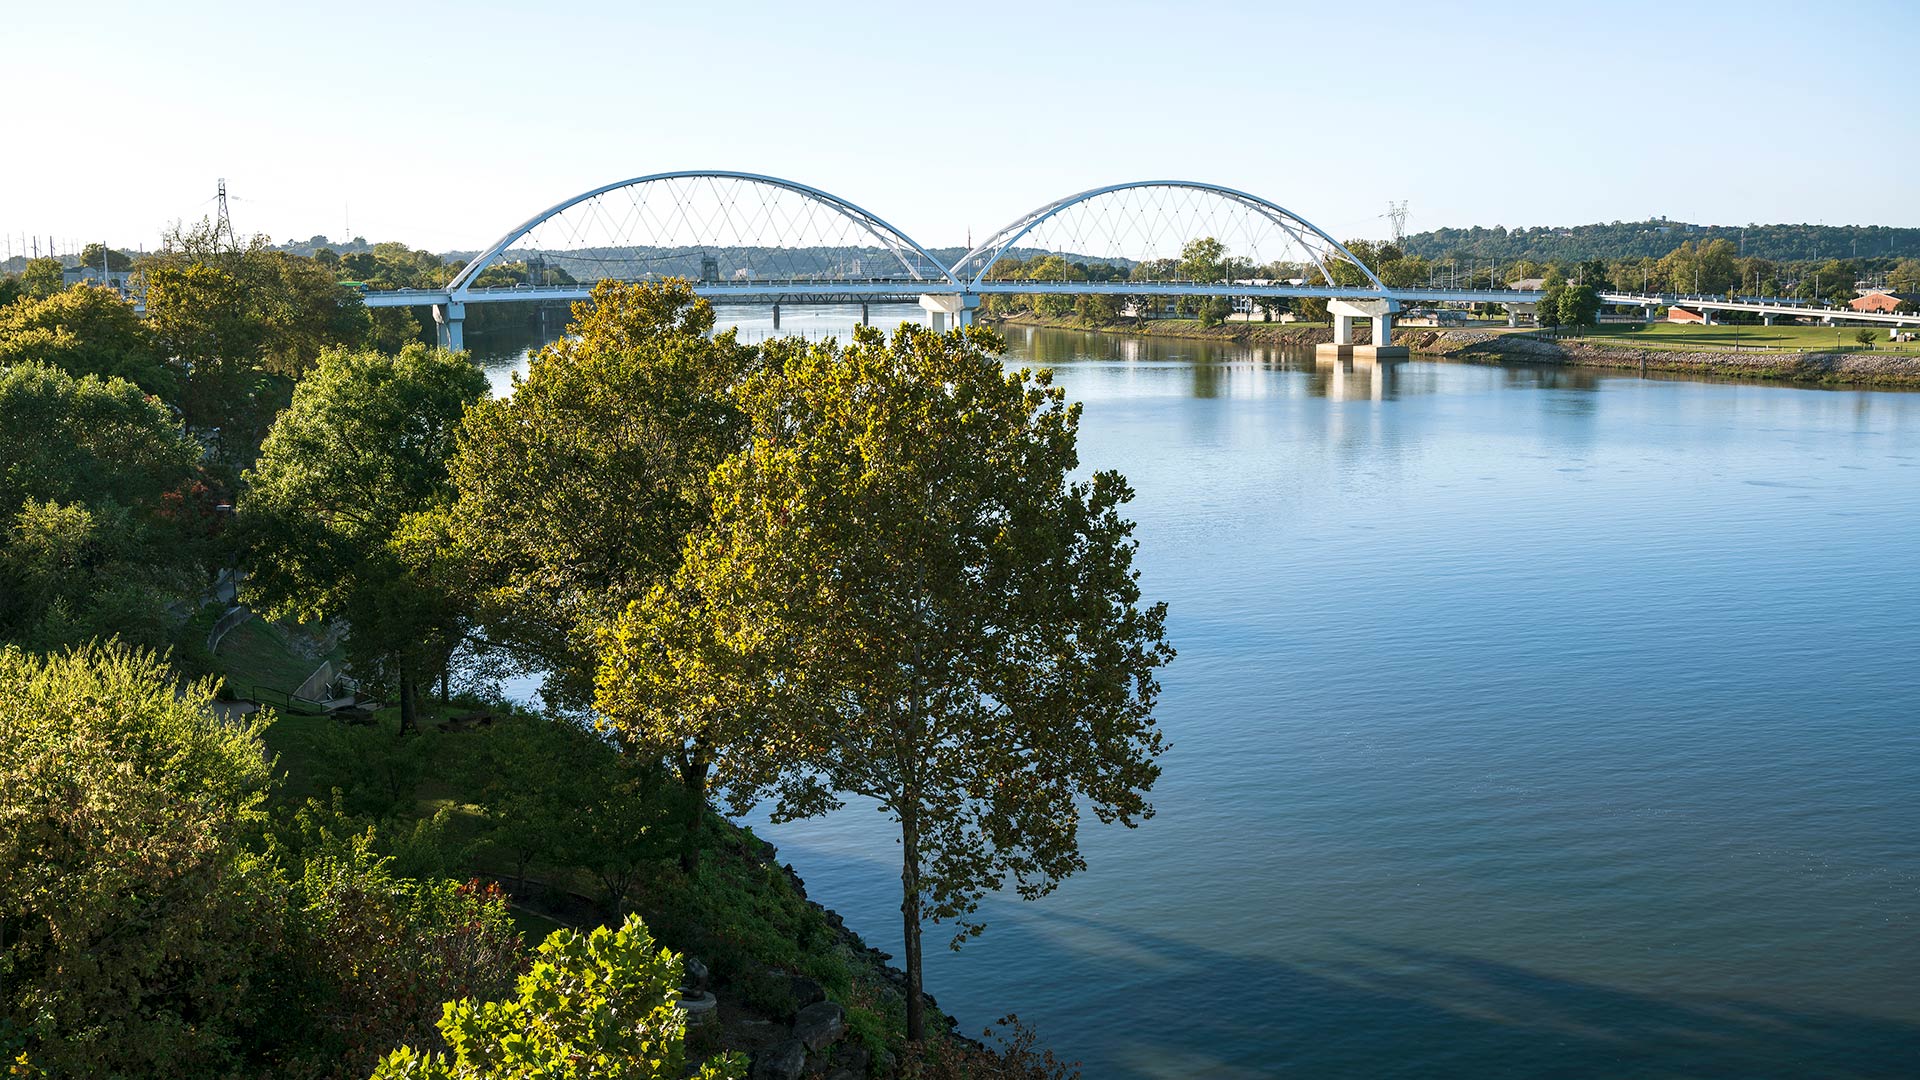 View of the Arkansas River in Little Rock